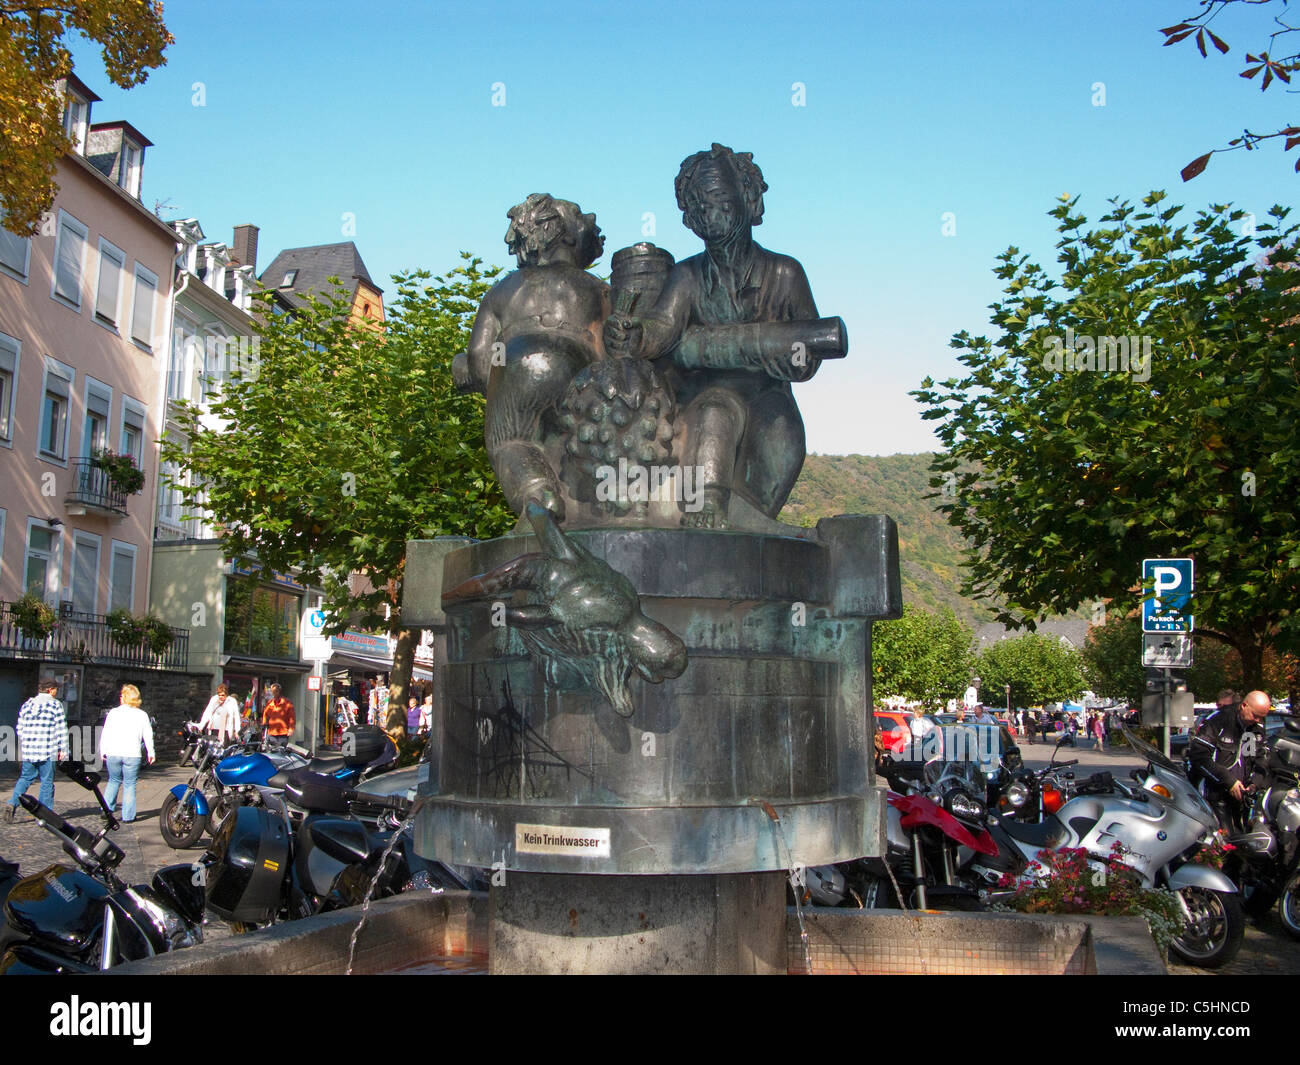 Brunnen am Moselufer, Cochem, Mosel, Fountain at the mosel river, old town, Cochem, Moselle Stock Photo